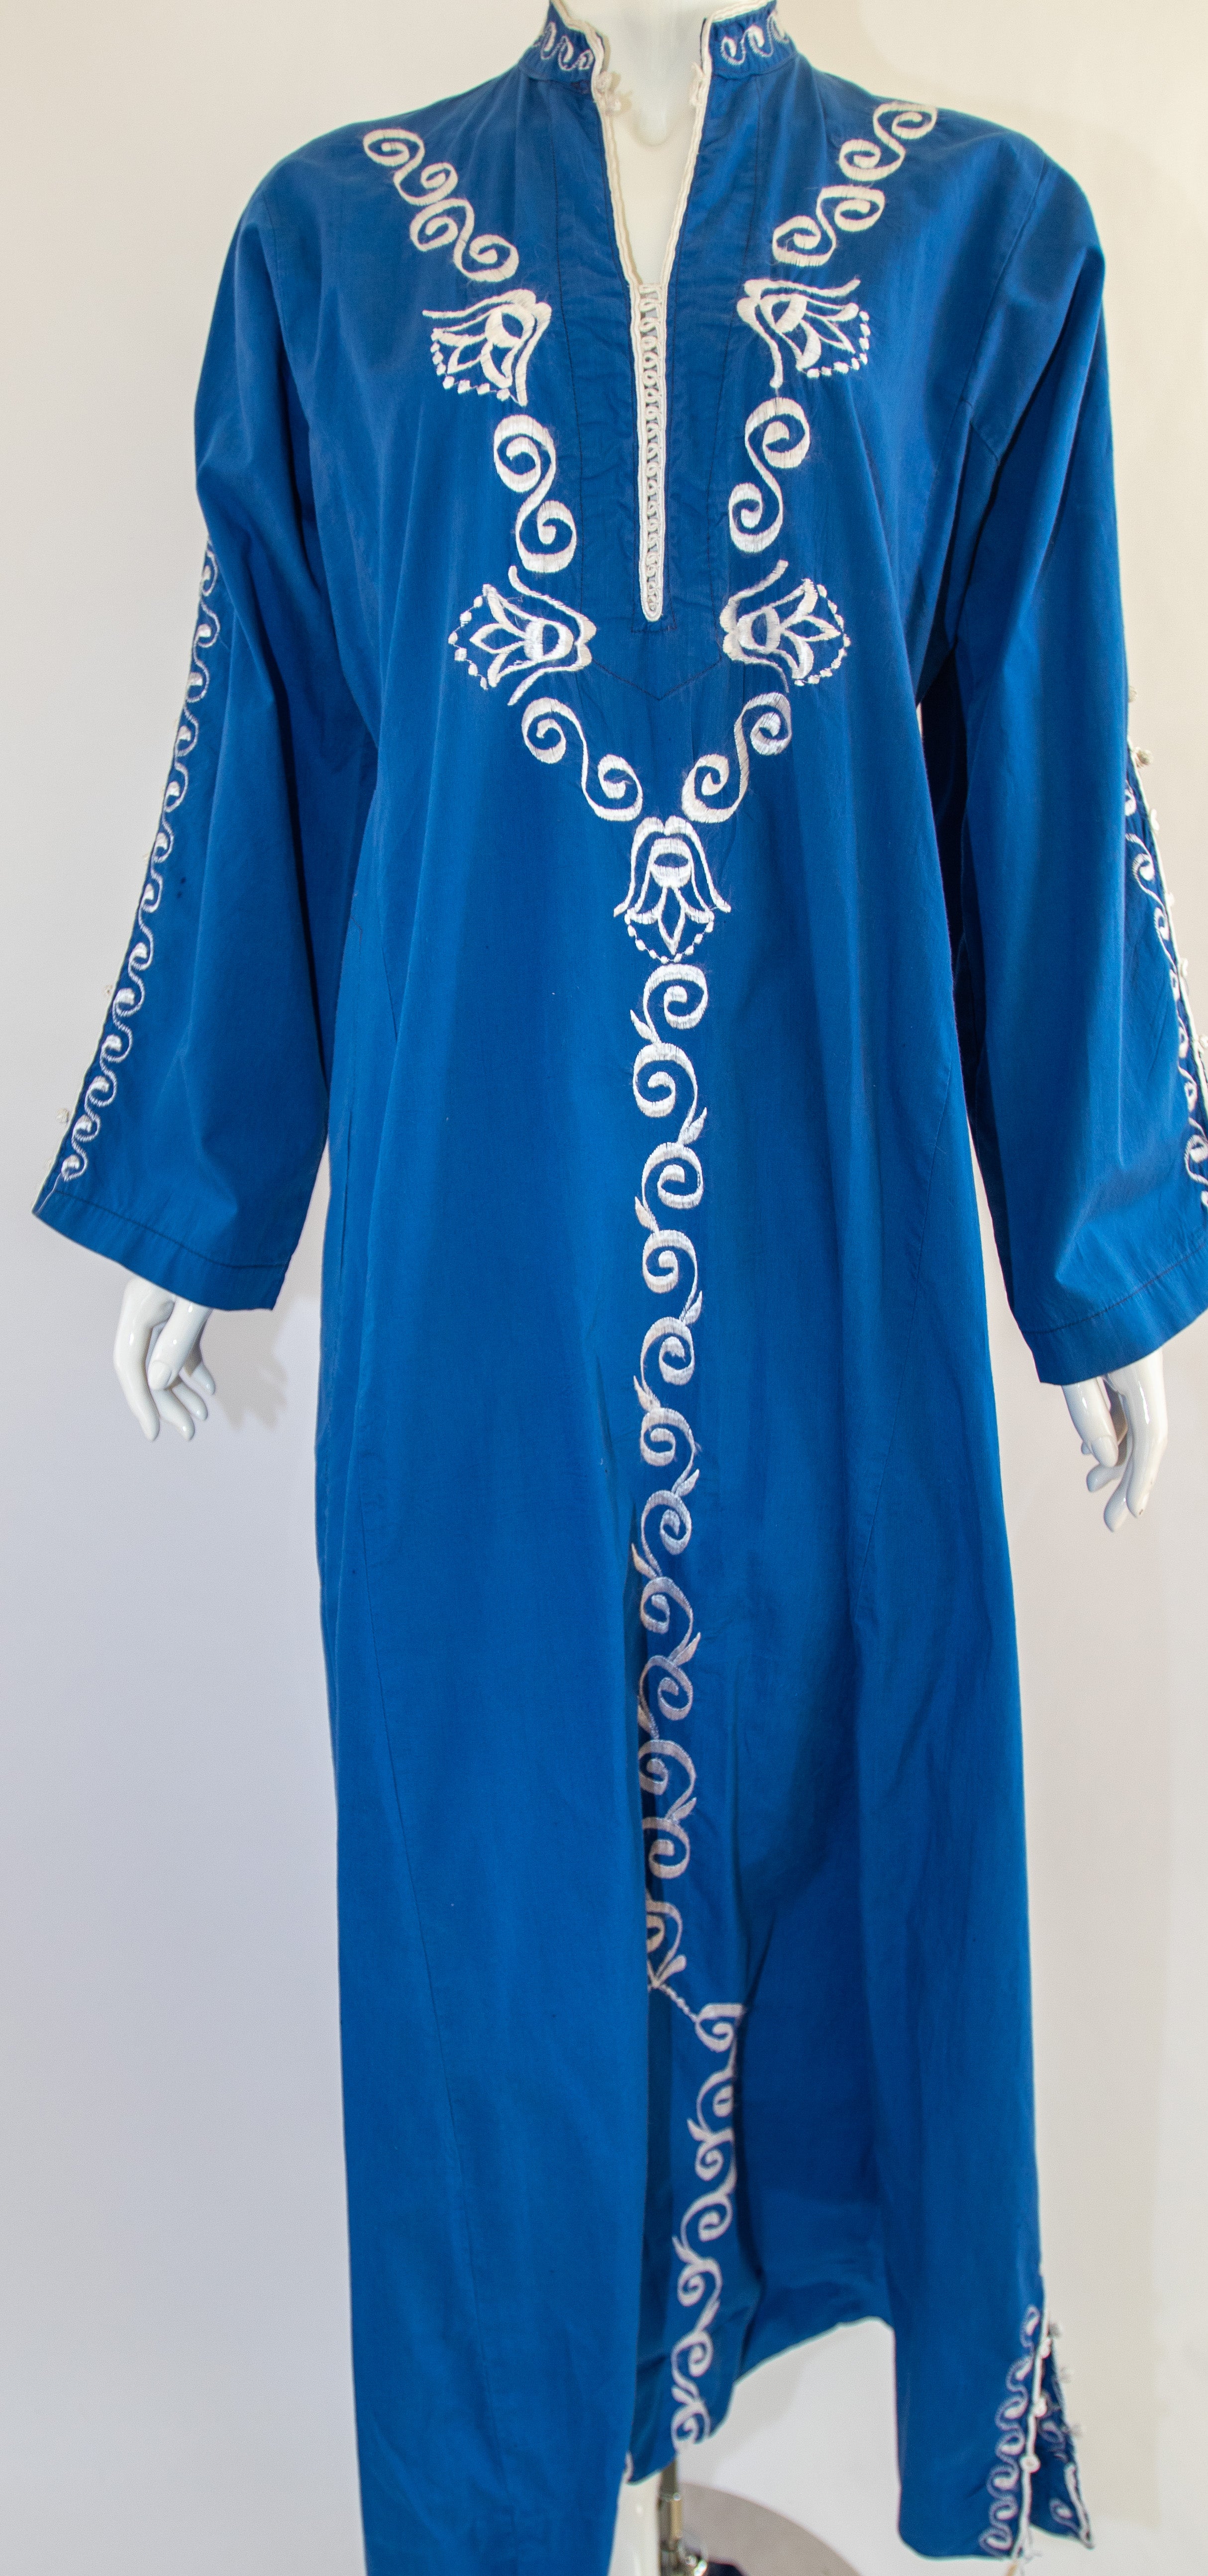 Vintage Moorish Moroccan blue caftan, circa 1970s.
Vintage Moorish Maxi Dress kaftan in blue denim color with white embroideries.
Long sleeves.
Size medium.
Measurements: 
Bust: 40